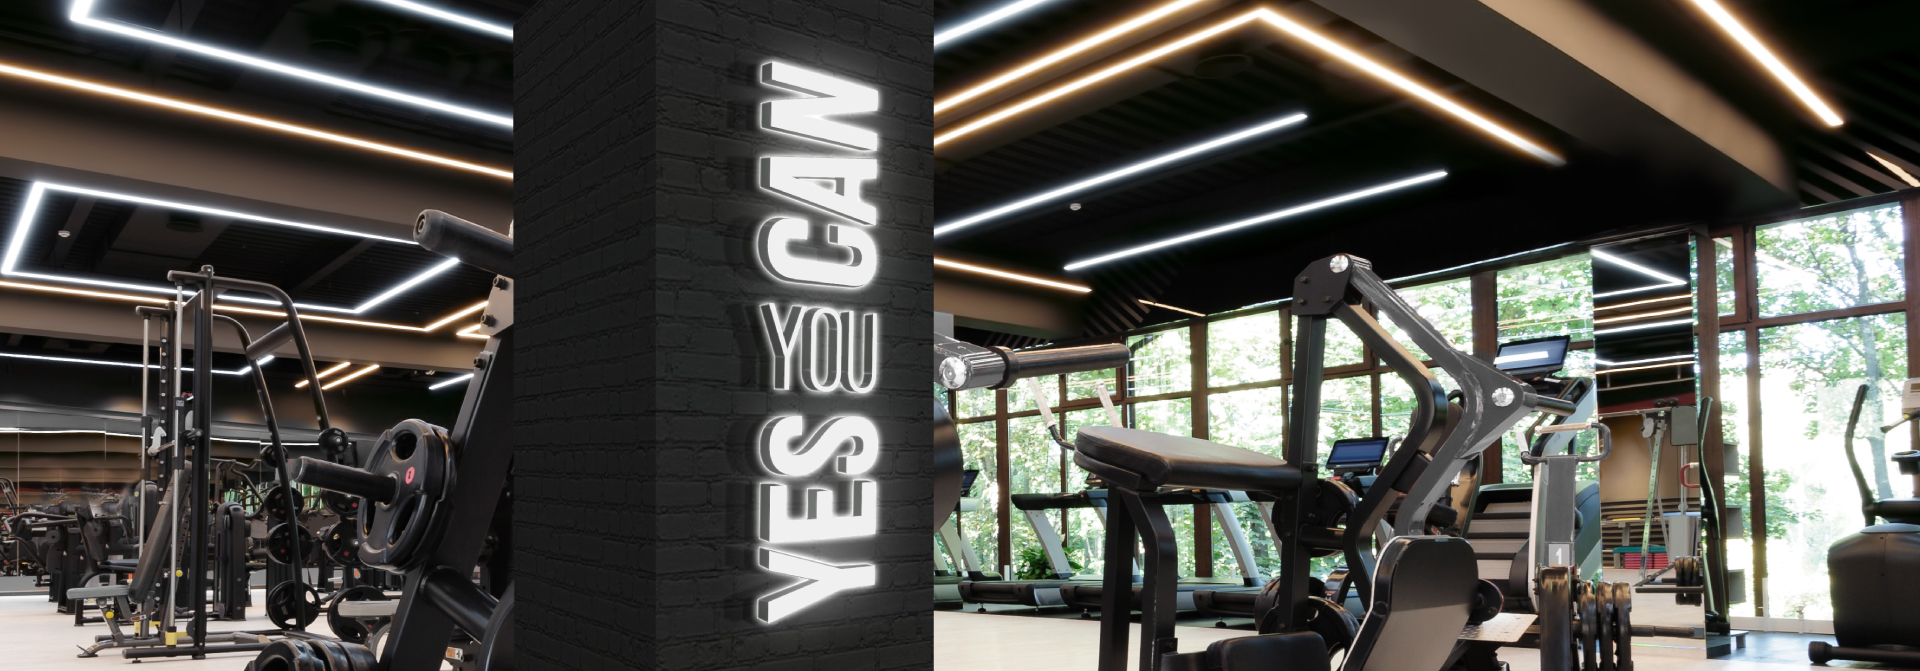 16 Gym Design and Branding Ideas for a VIP Customer Experience